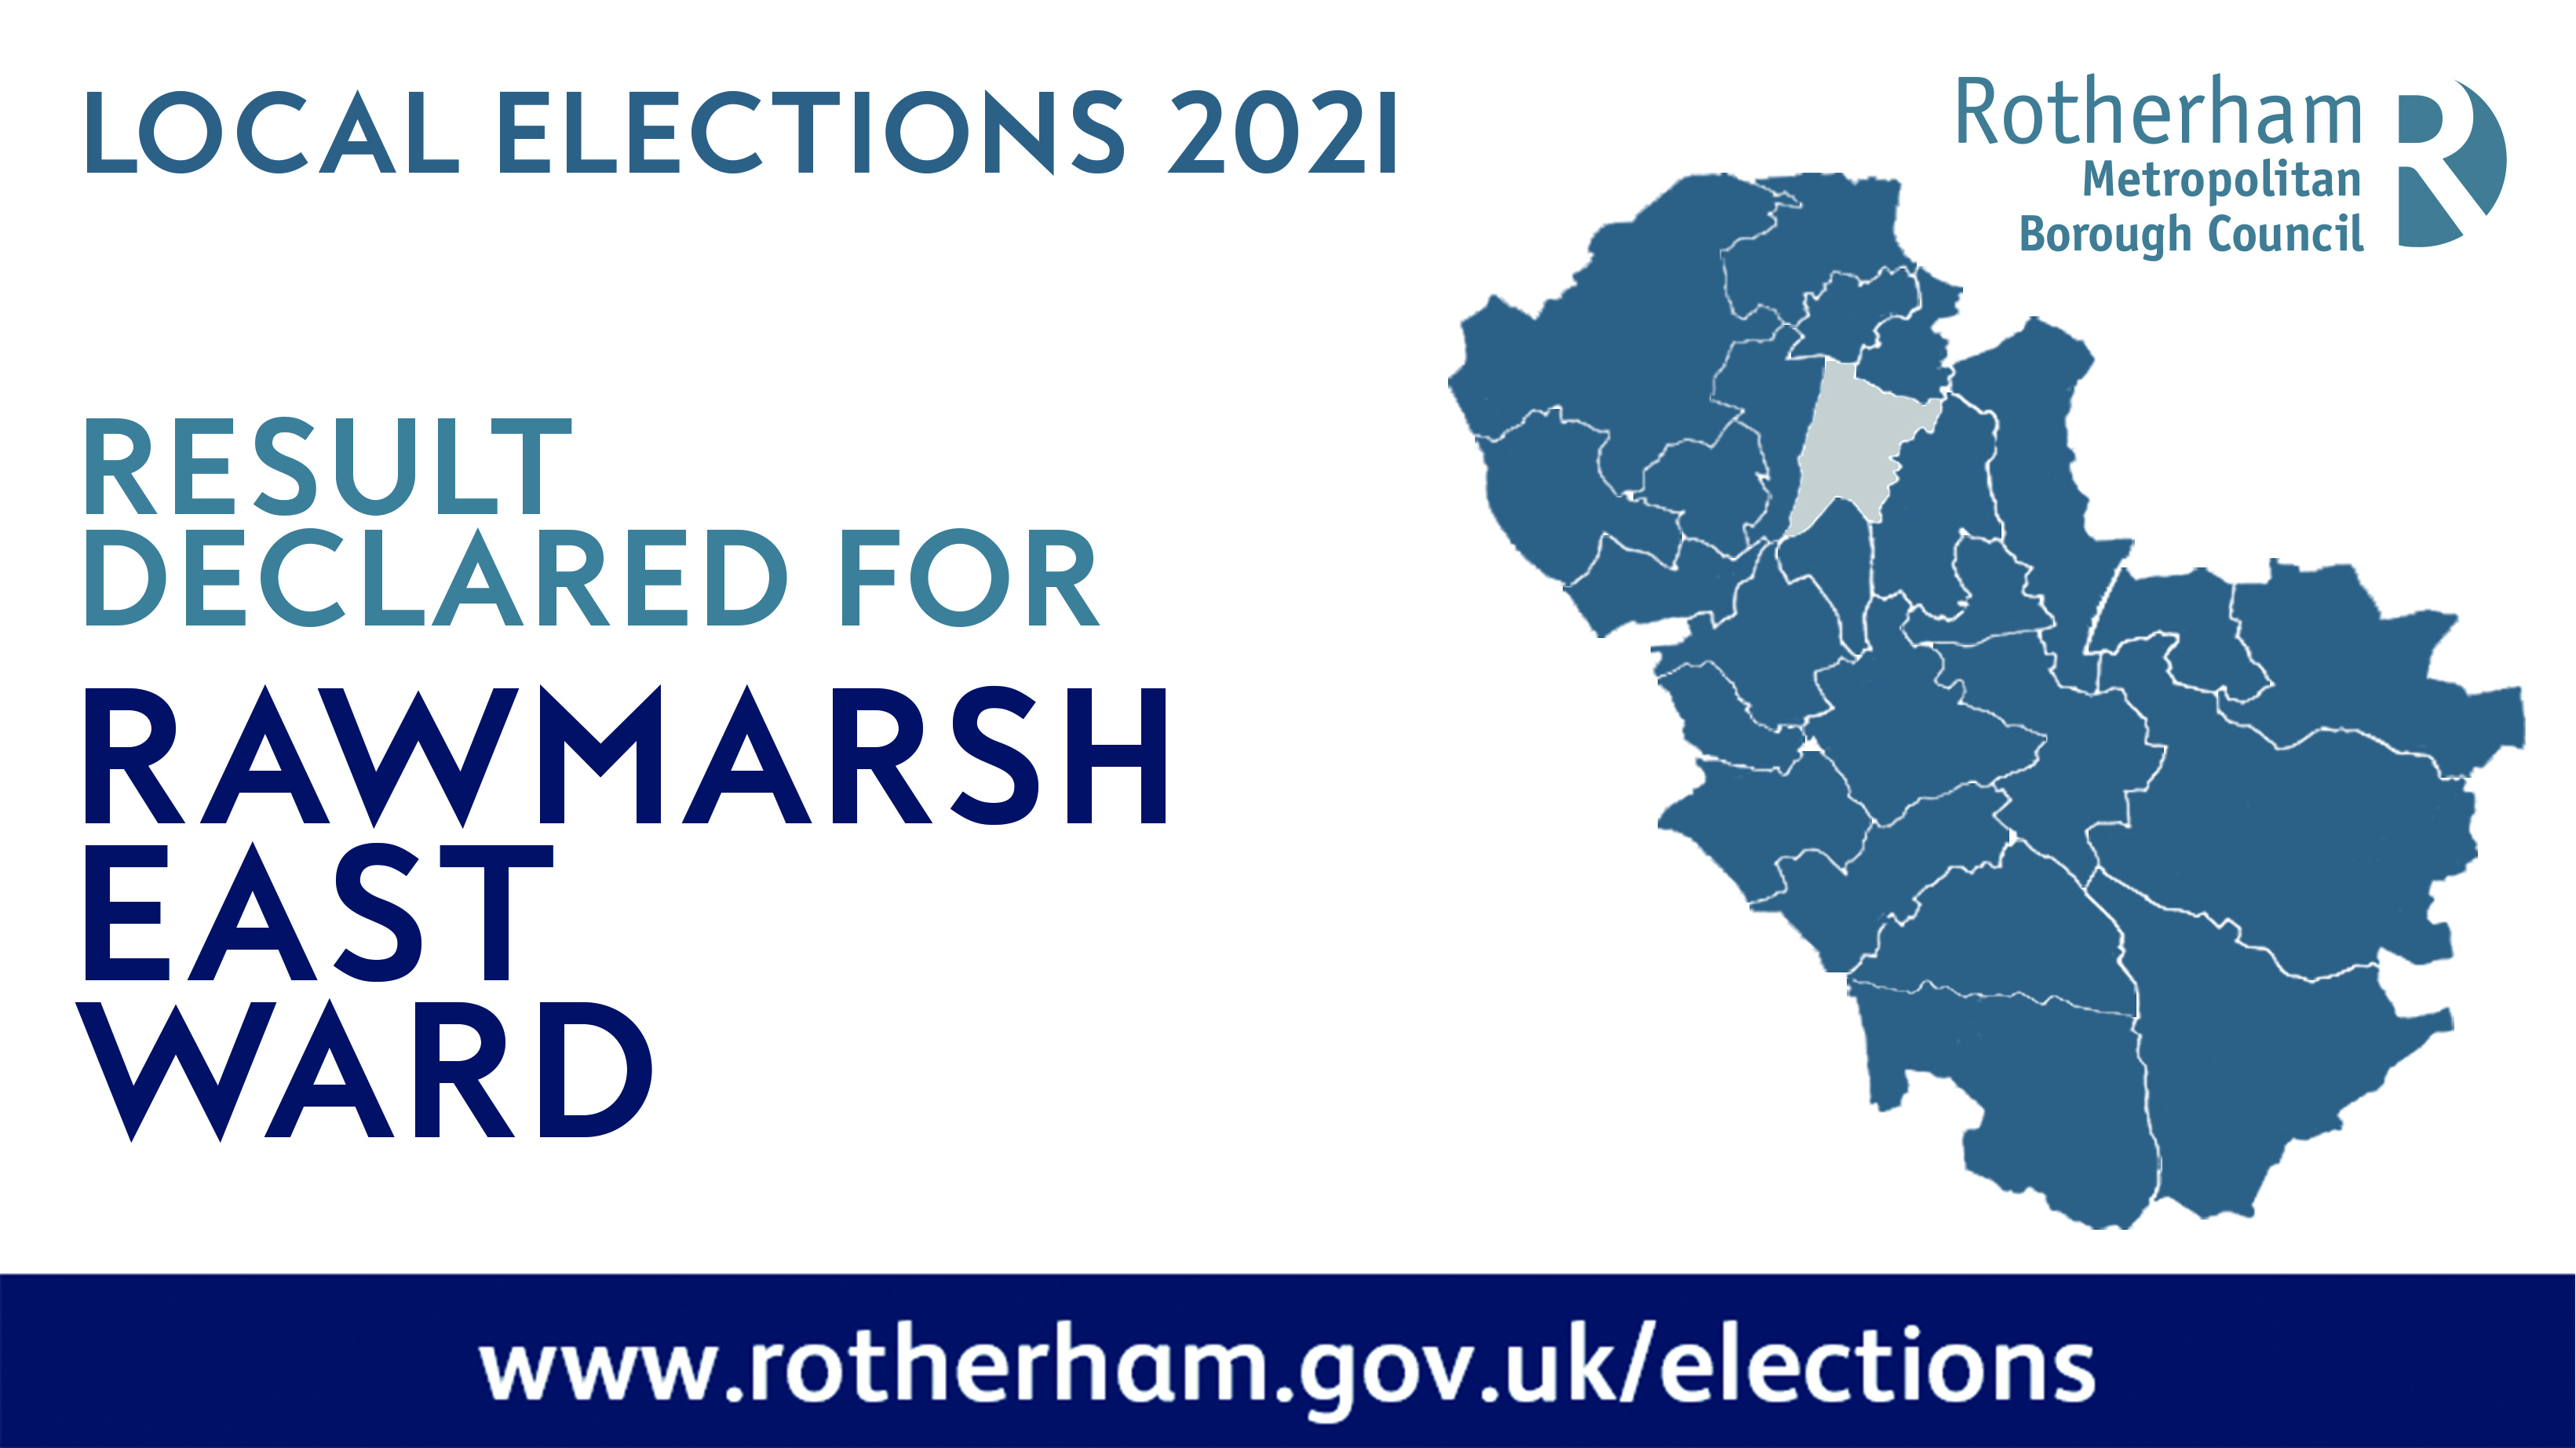 Proposed polling districts and polling places for Rawmarsh east